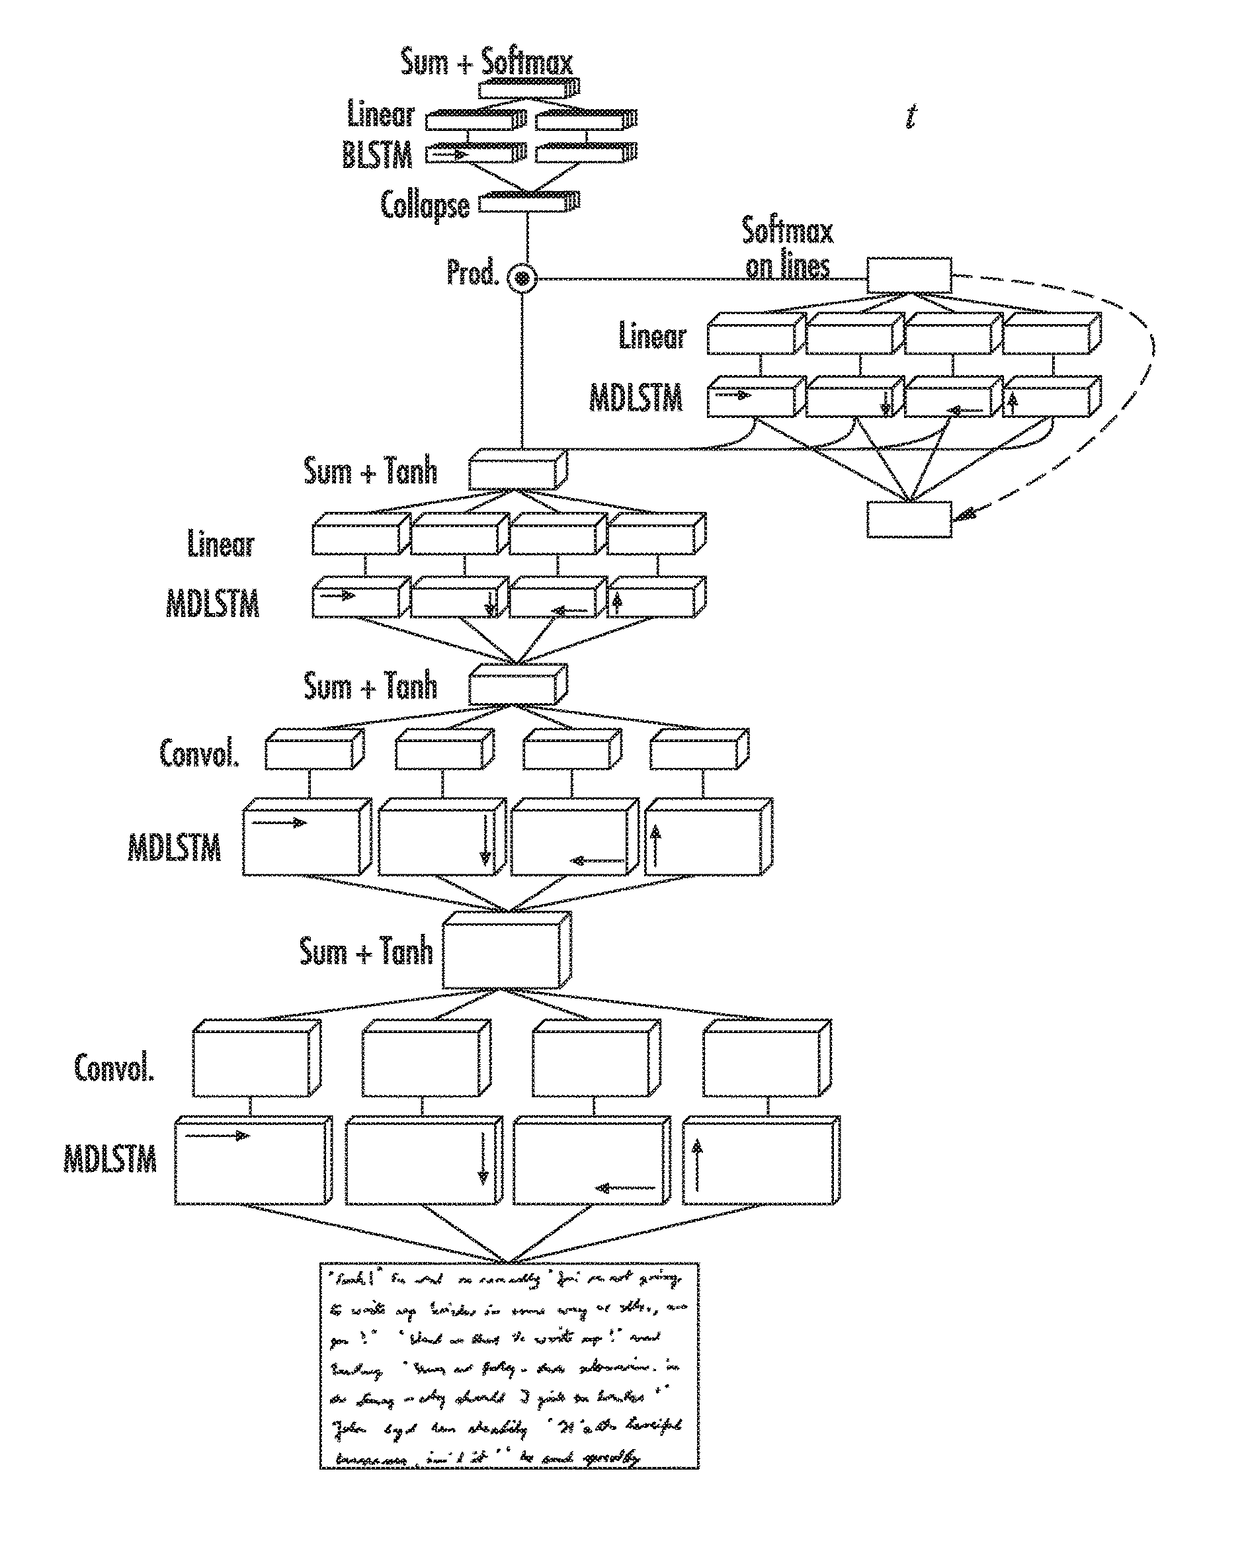 Systems and methods for recognizing characters in digitized documents